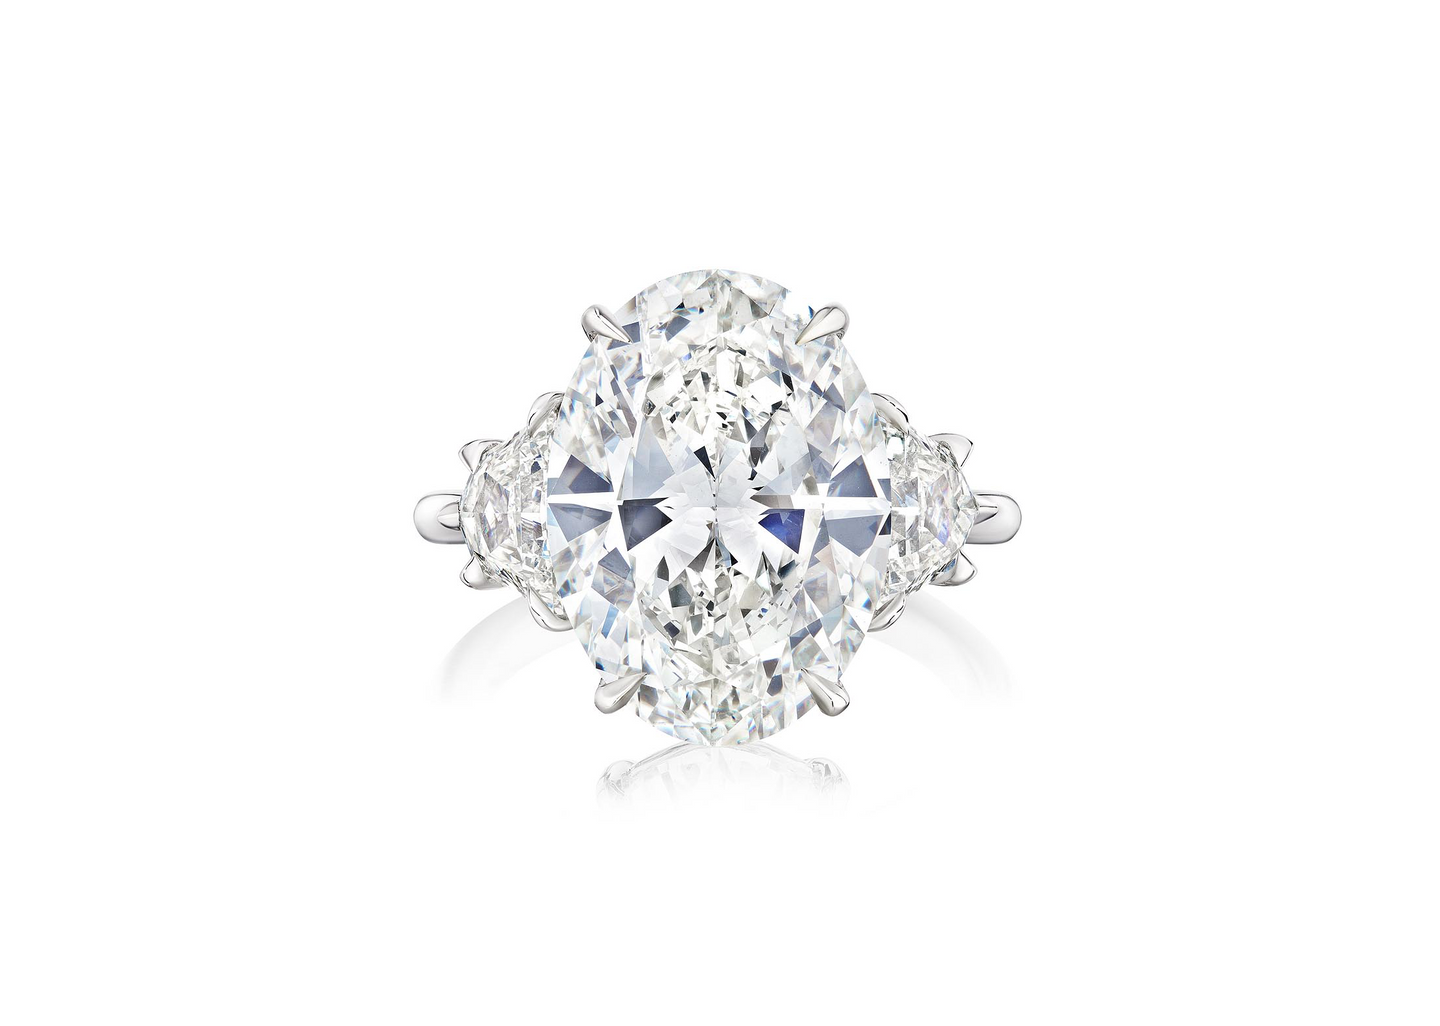 Fink's Exclusive Platinum Oval Diamond Engagement Ring with Diamond Side Accents